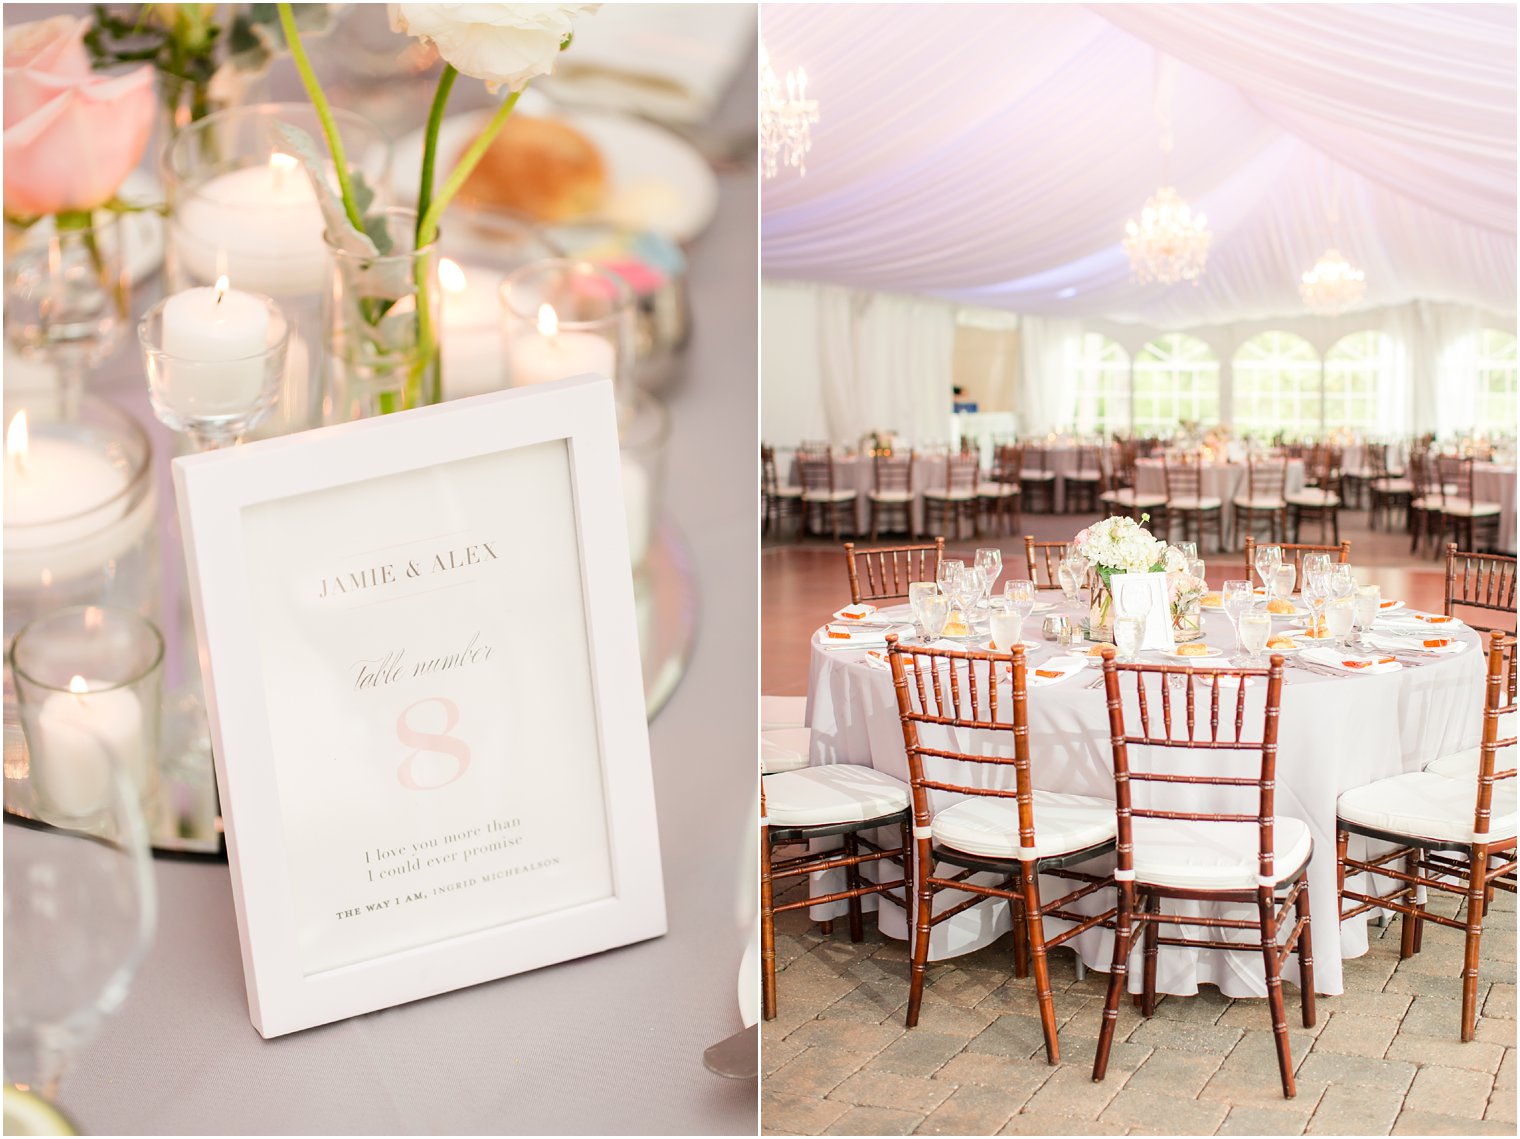 NJ Tented Reception Locations | Windows on the Water at Frogbridge | Photos by Idalia Photography